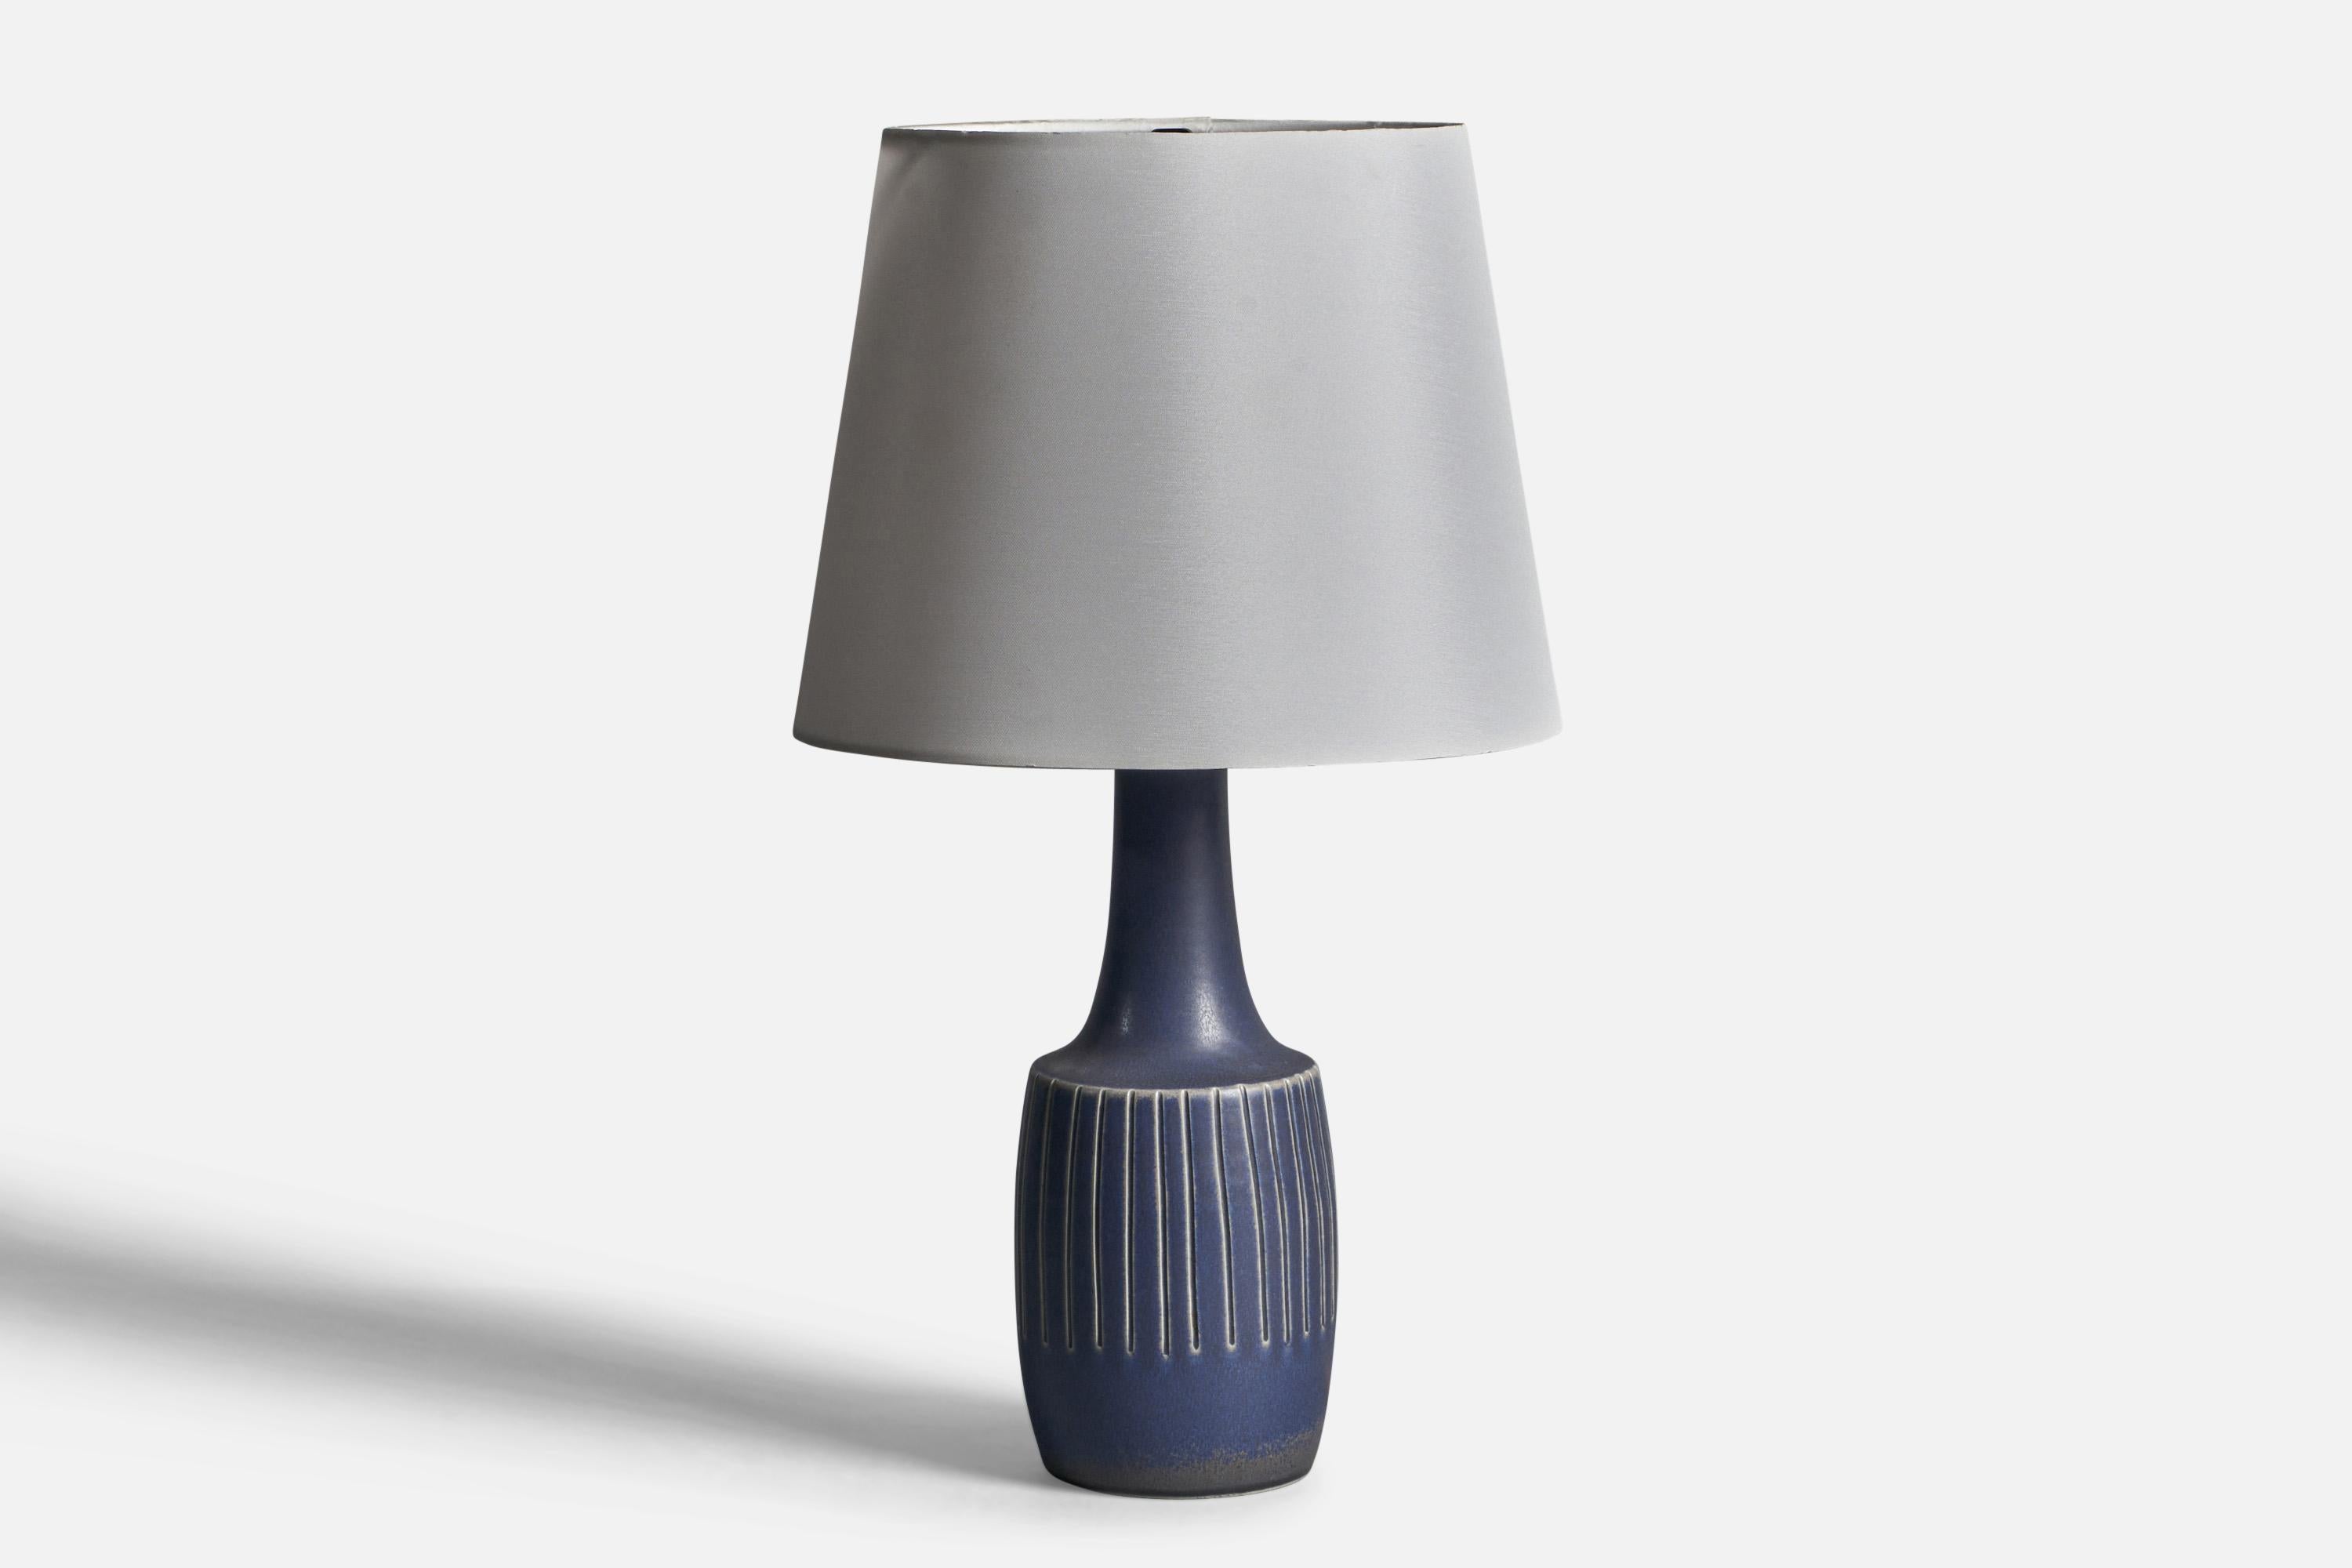 A blue-glazed stoneware table lamp designed and produced by  Søholm, Bornholm, Denmark, 1960s.

Dimensions of Lamp (inches): 13